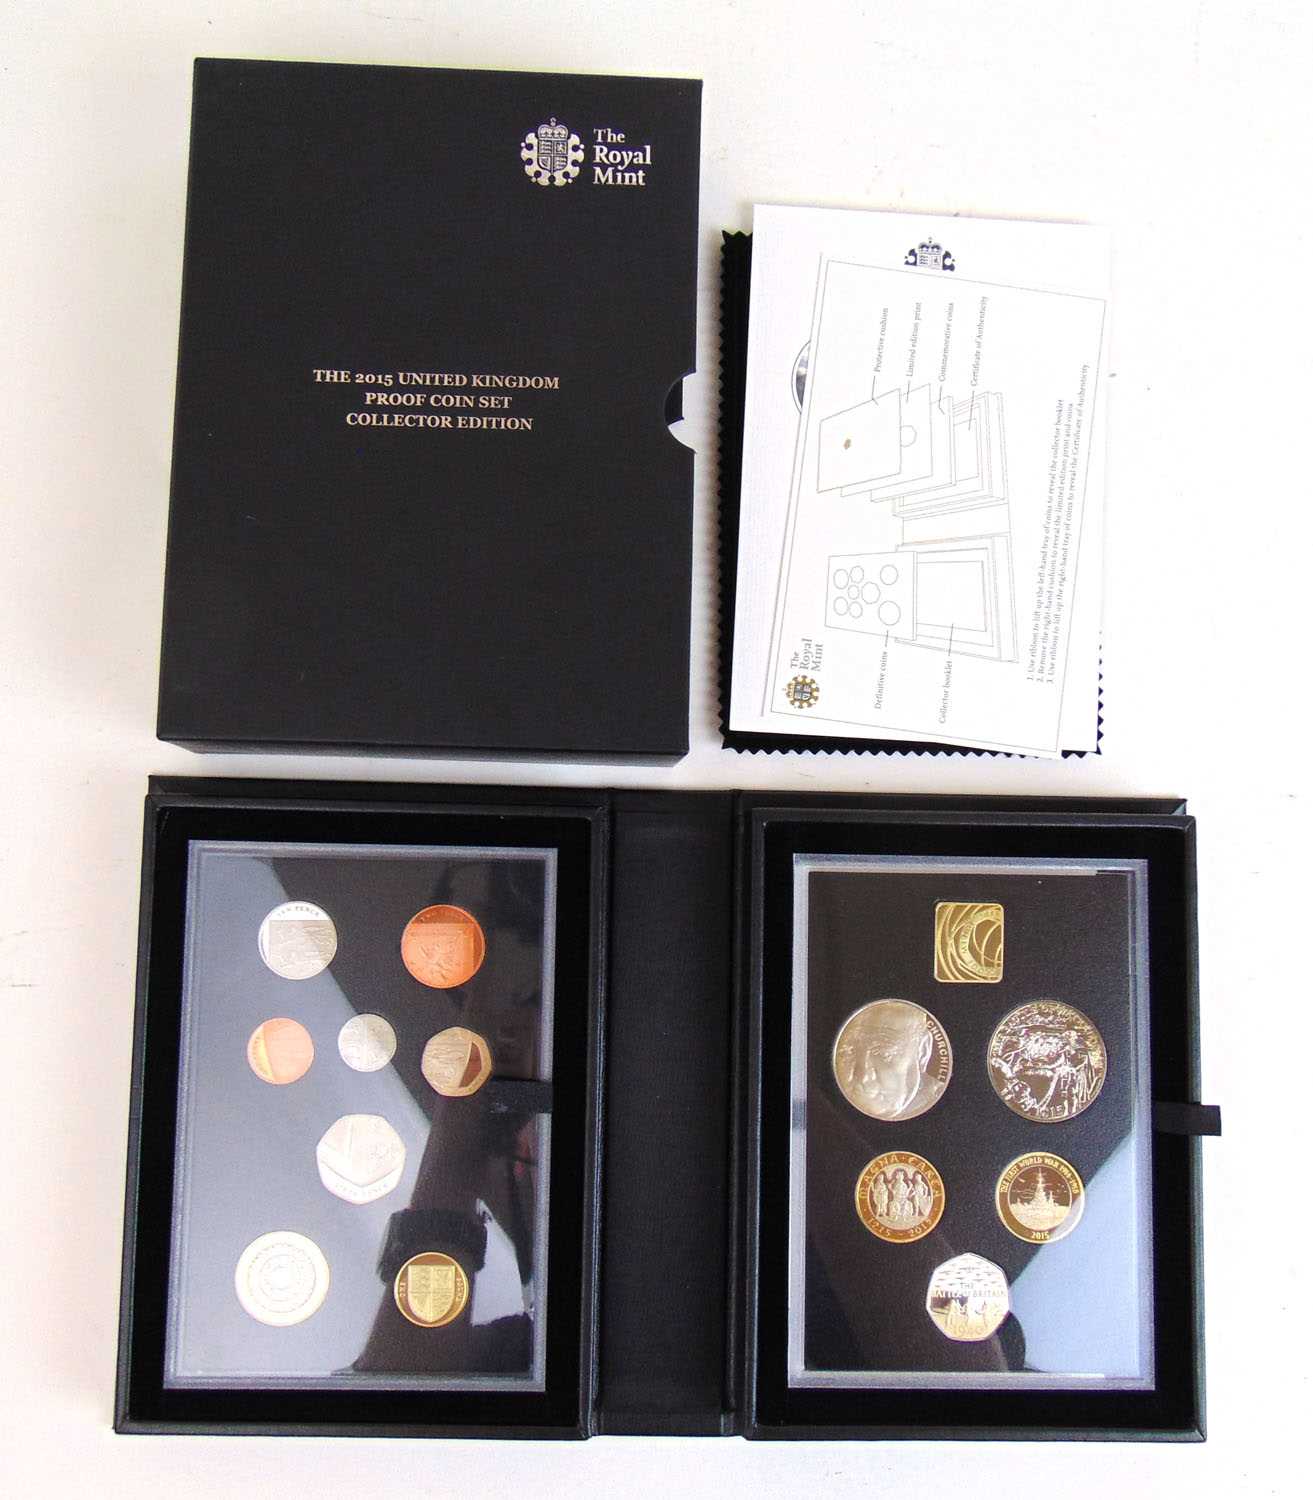 A 2015 United Kingdom Collector Edition coin poof set